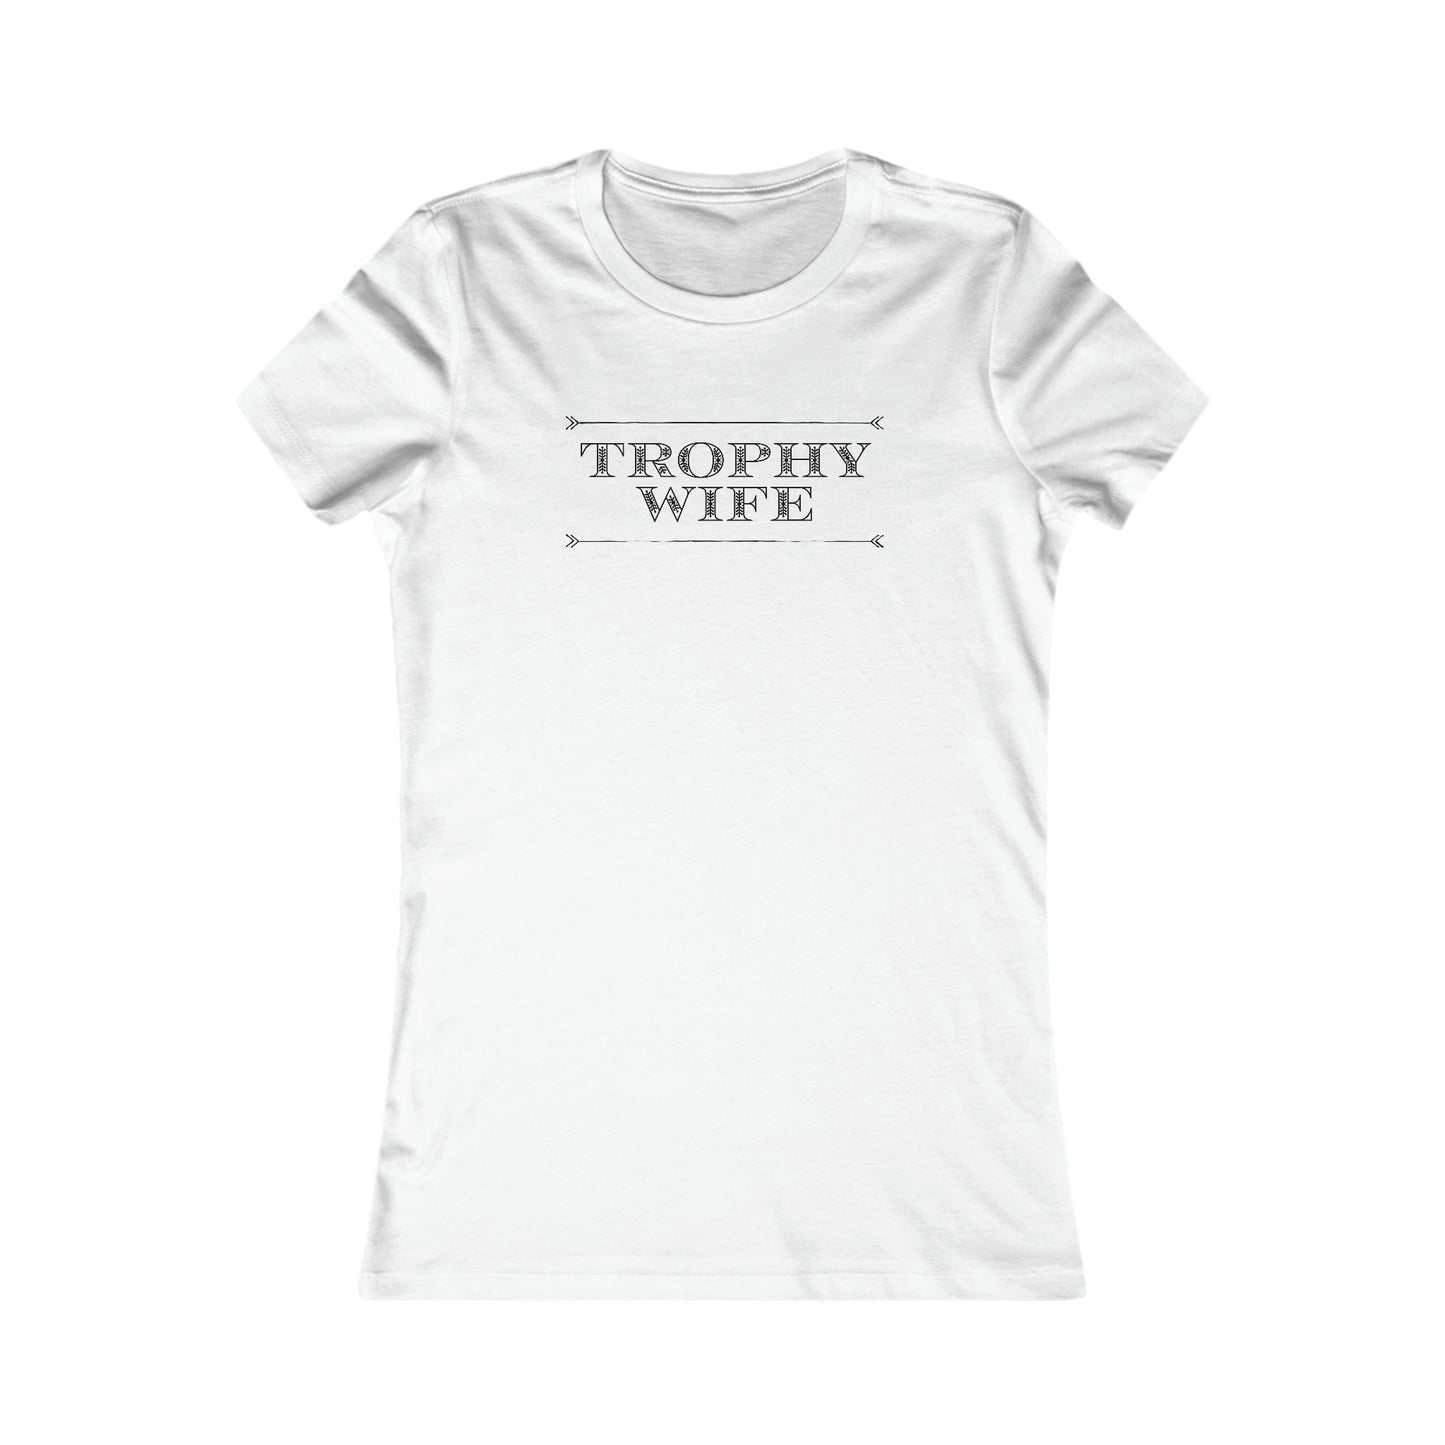 Trophy Wife T- Shirt For Best Wife T Shirt For Wifey TShirt For Funny Wife Gift